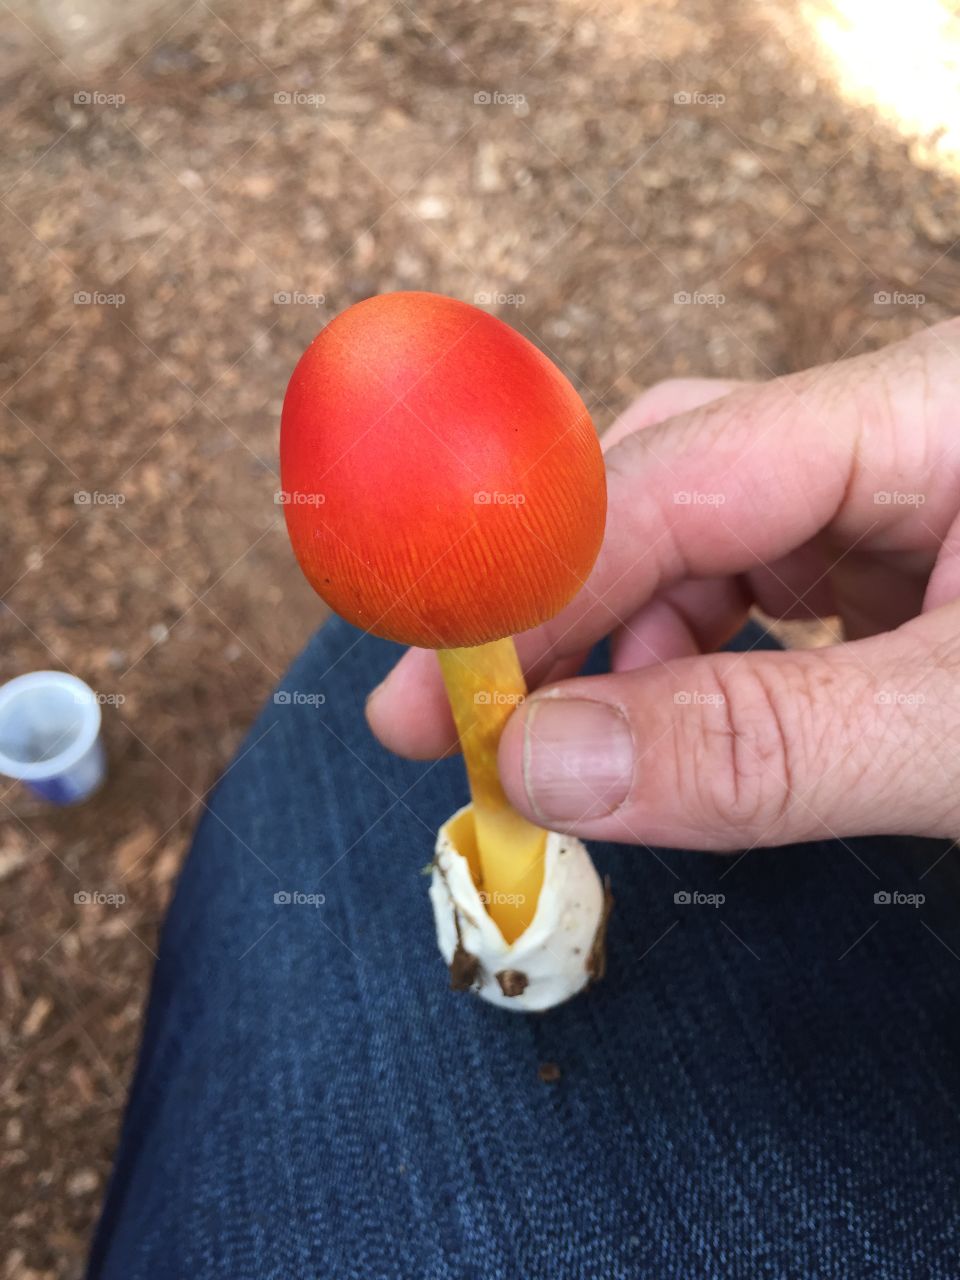 Beautiful red capped mushroom. The gills are visible from the top side of the cap. There is a skirt on the bottom of the mushroom. It was found growing in north east Georgia in mulch beneath an oak tree.